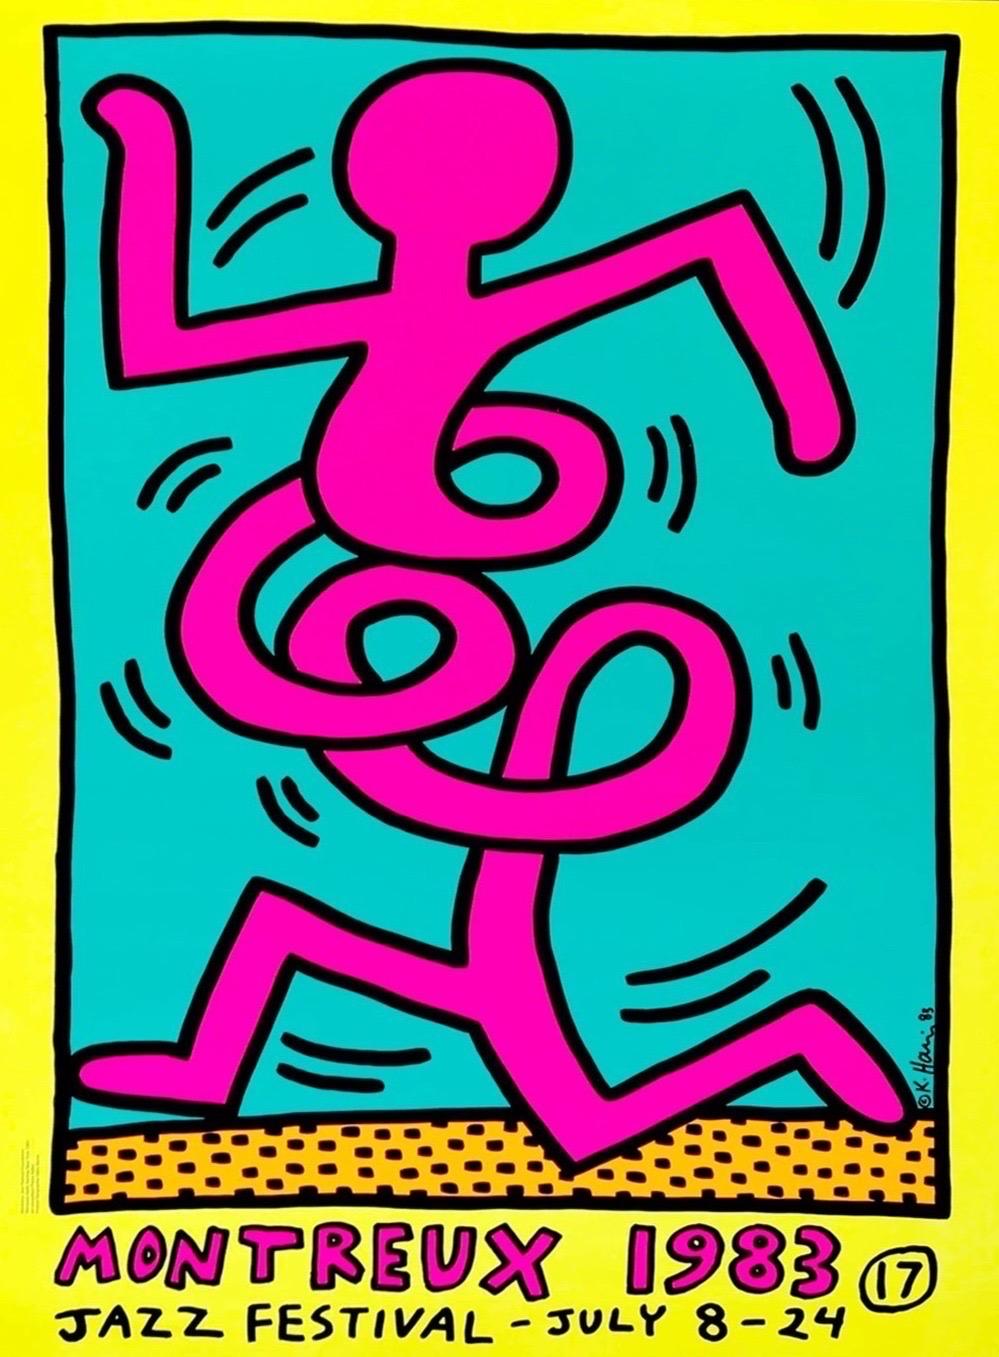 Montreux Jazz Festival posters (set of 3)

Keith Haring was invited to design the posters for the 17th Montreux Jazz Festival in 1983 after the organiser, Pierre Keller met the artist a few months after his debut gallery show at the Tony Shafrazi